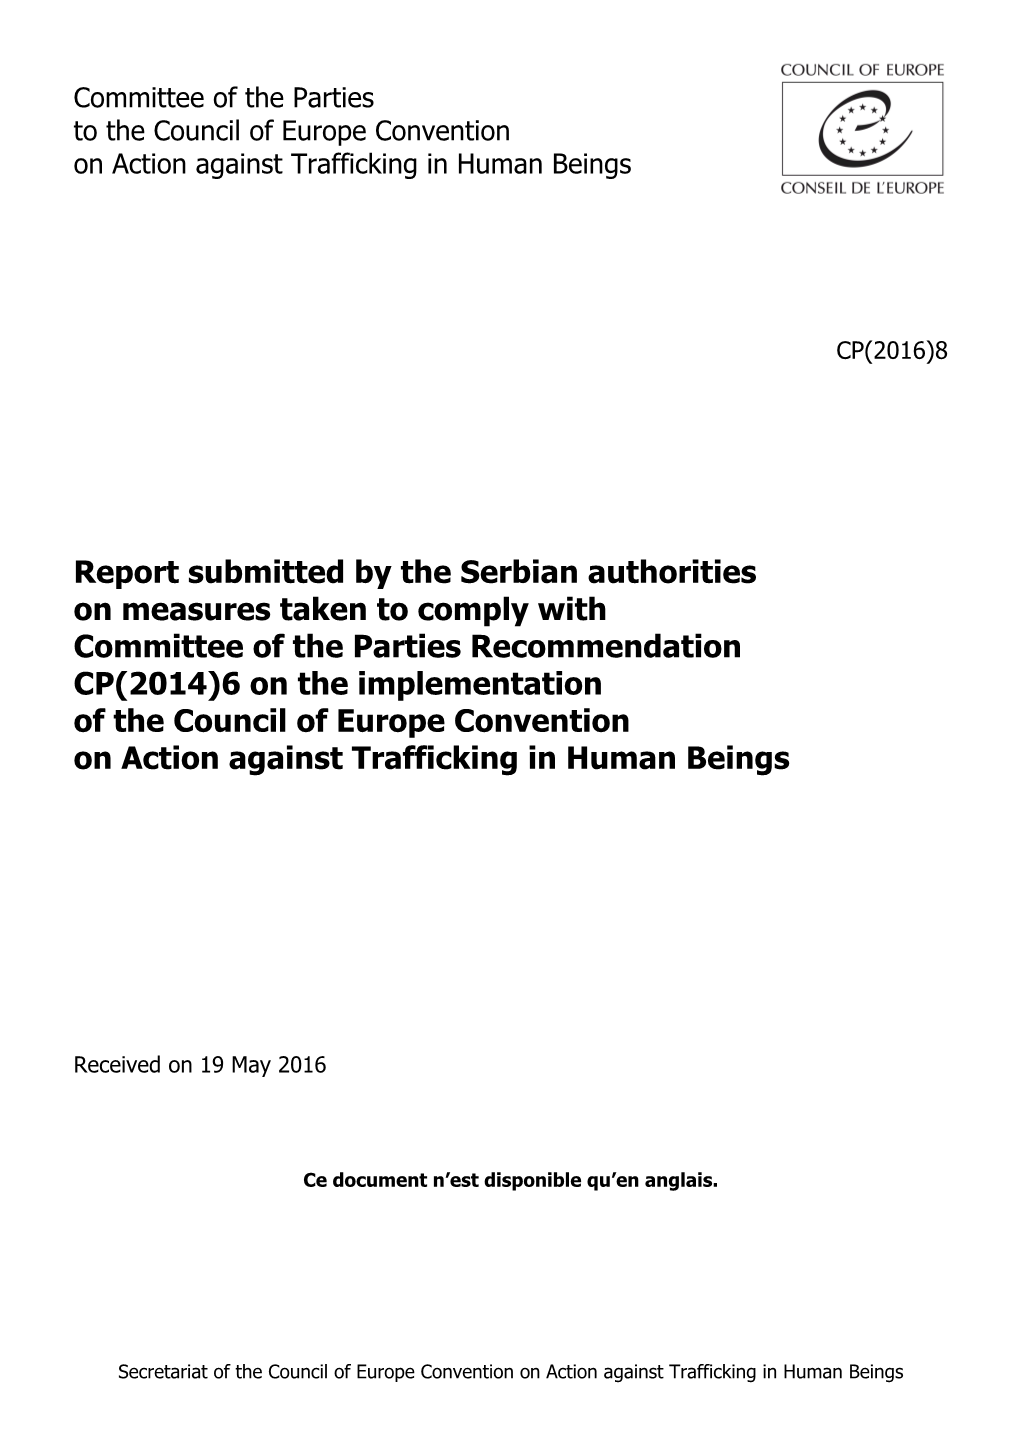 Report Submitted by the Serbian Authorities on Measures